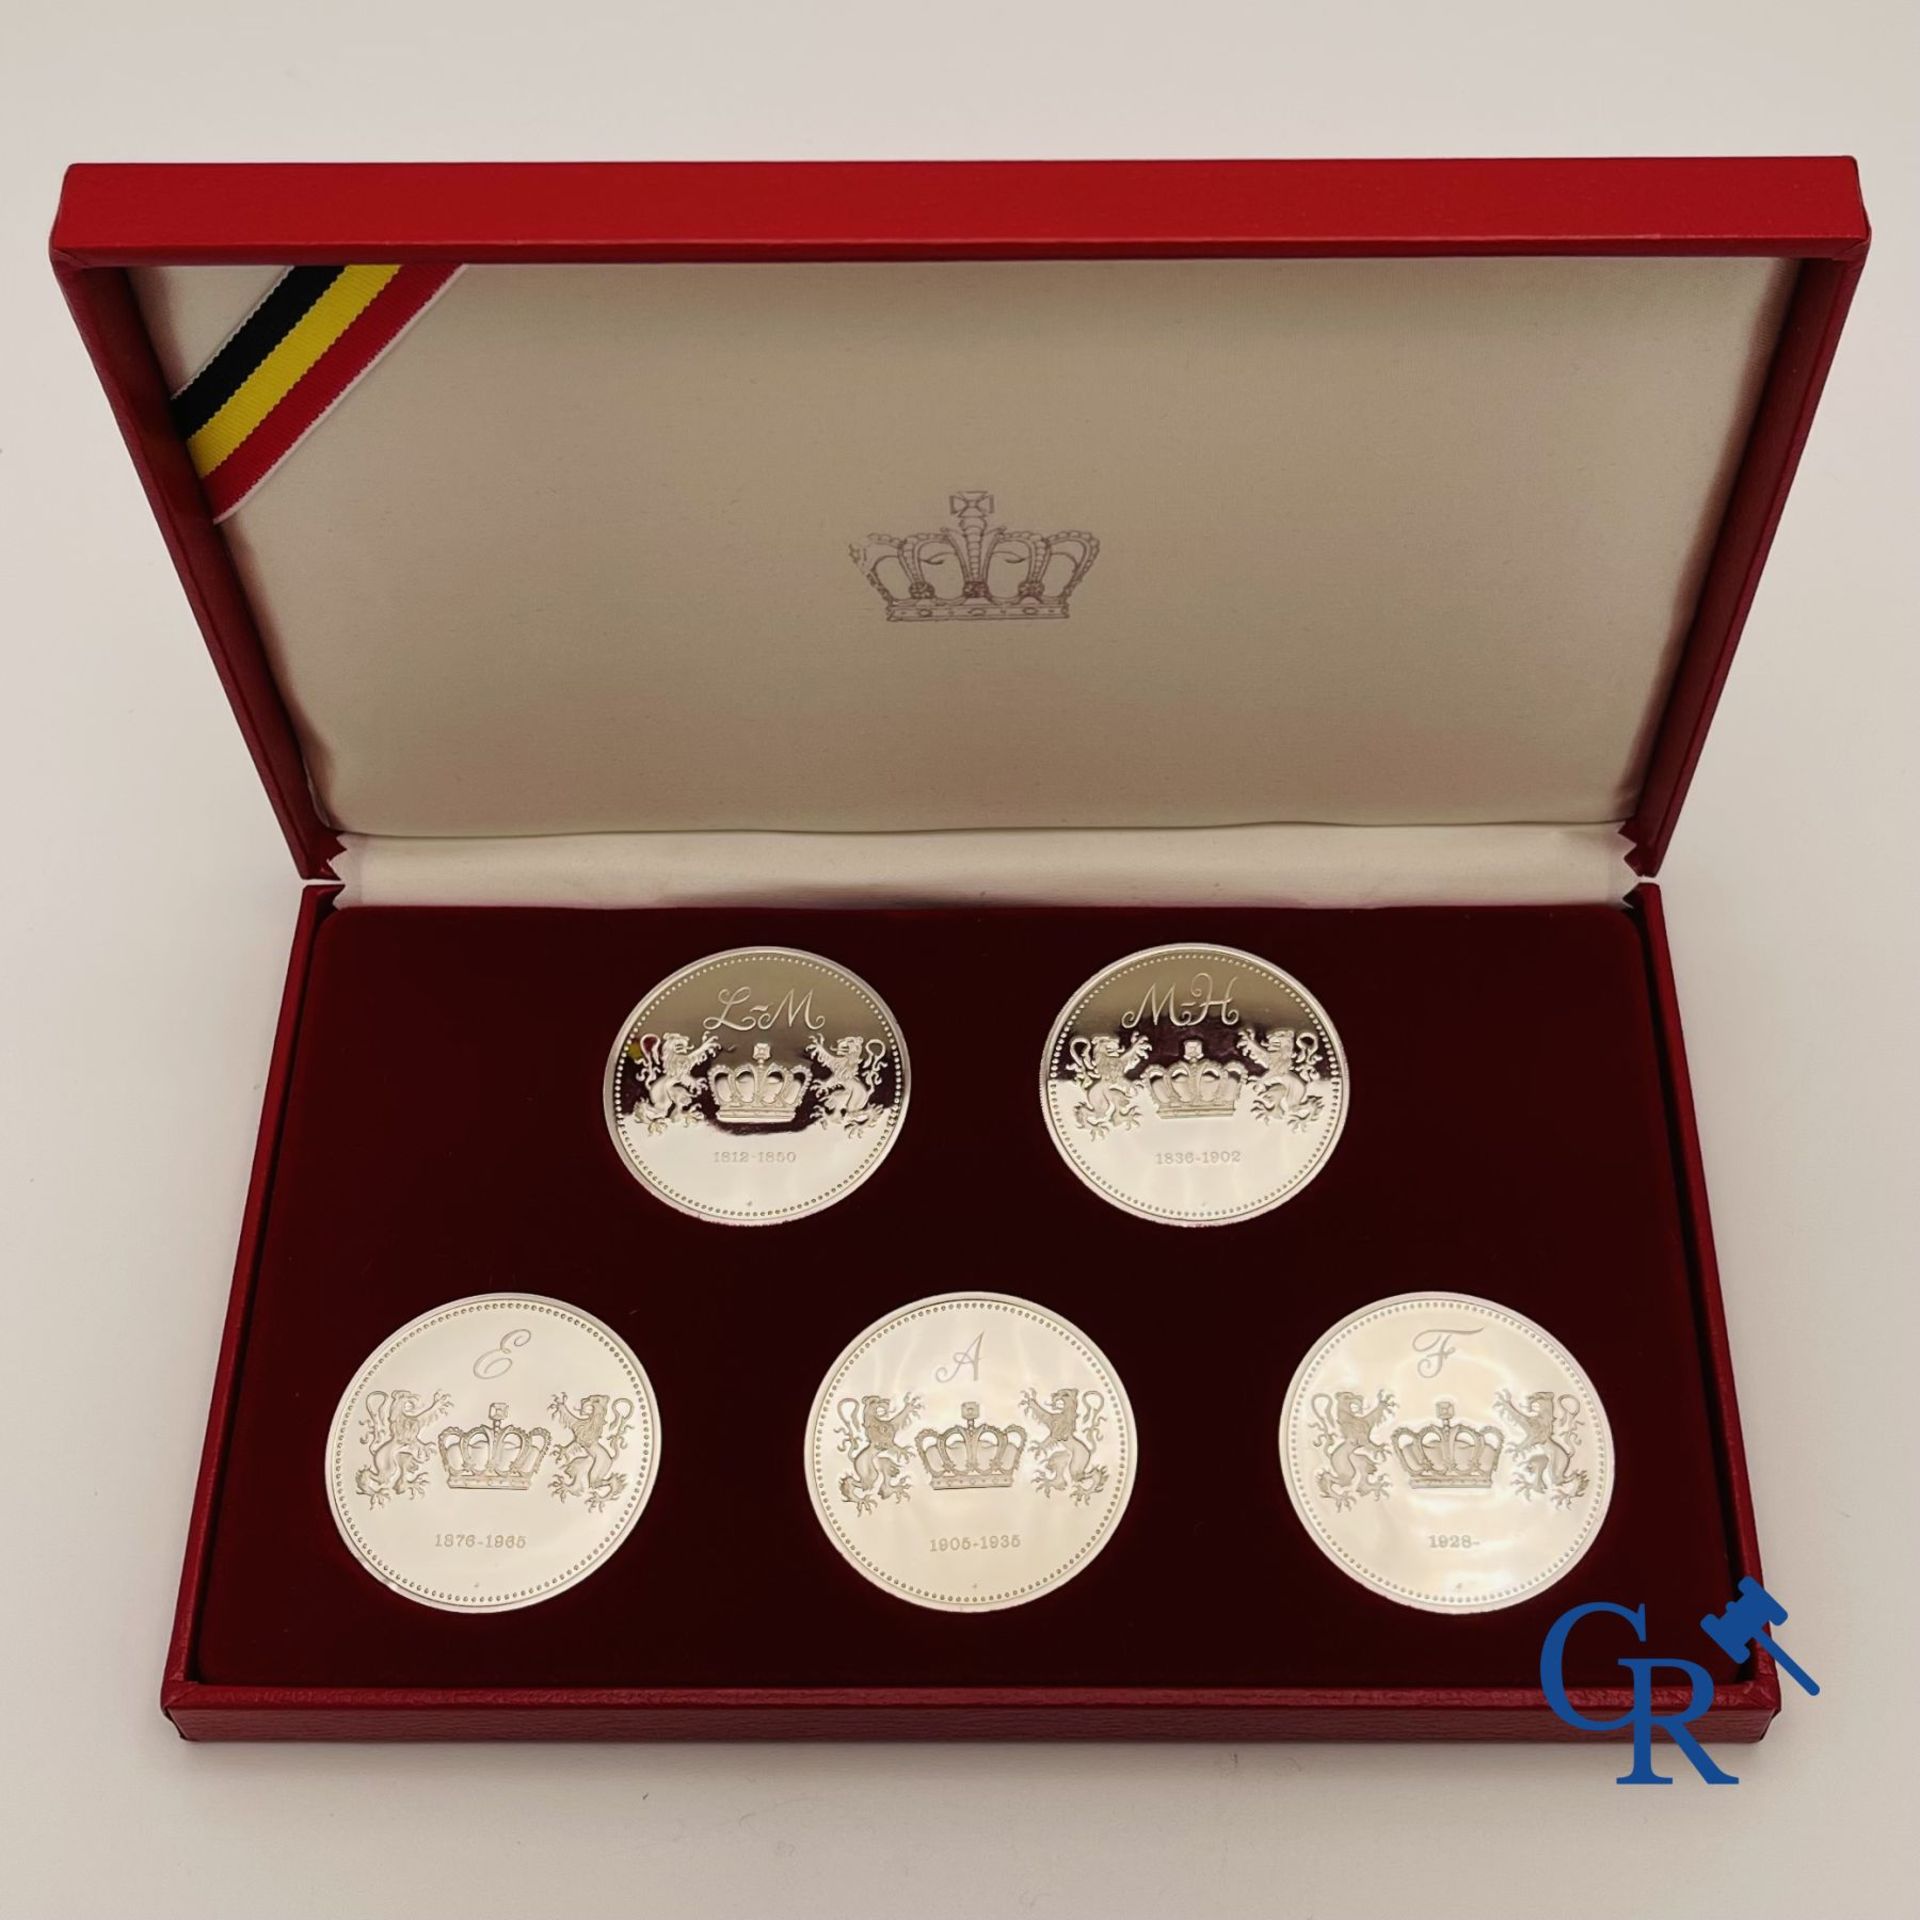 Sterling silver: Commemorative medals: 10 Portrait tokens of the kings and queens of Belgium. - Image 5 of 6